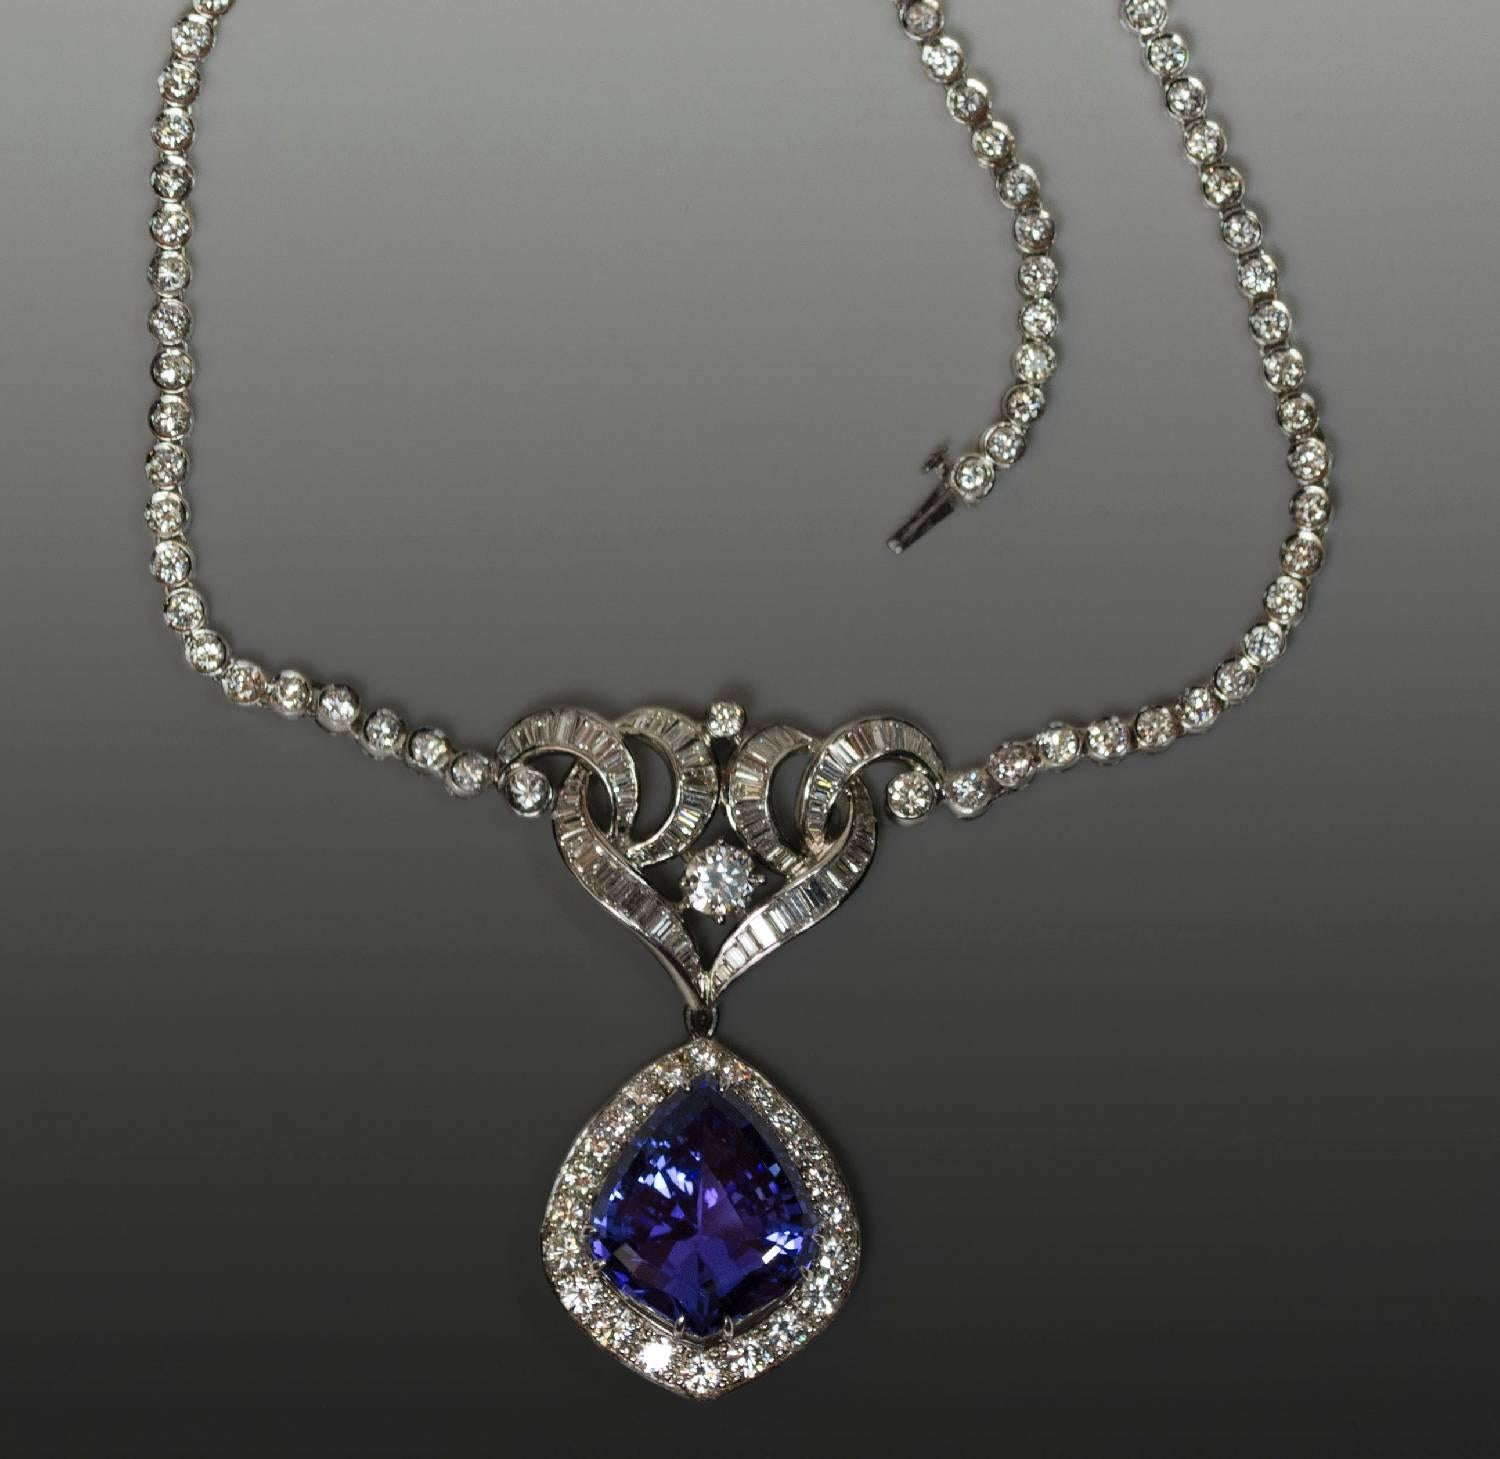 Platinum Necklace With 17.95 carat fancy shape Tanzanite and approximately 16.98 carats of round brilliant and baguette cut Diamonds,